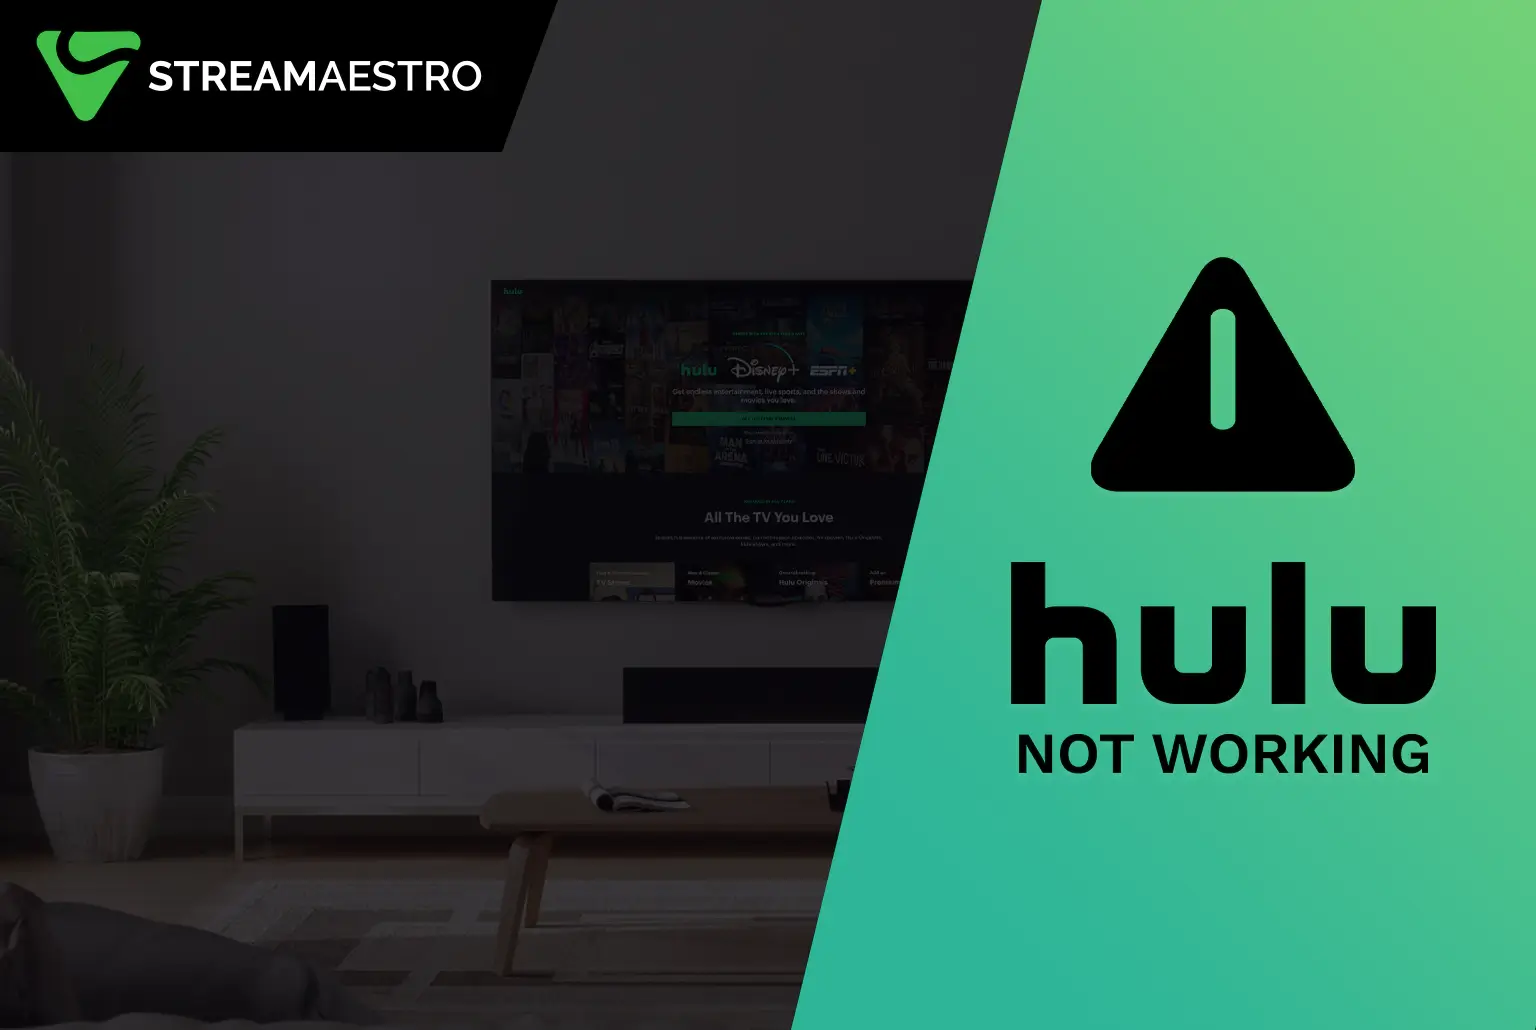 Is Your Hulu Not Working?